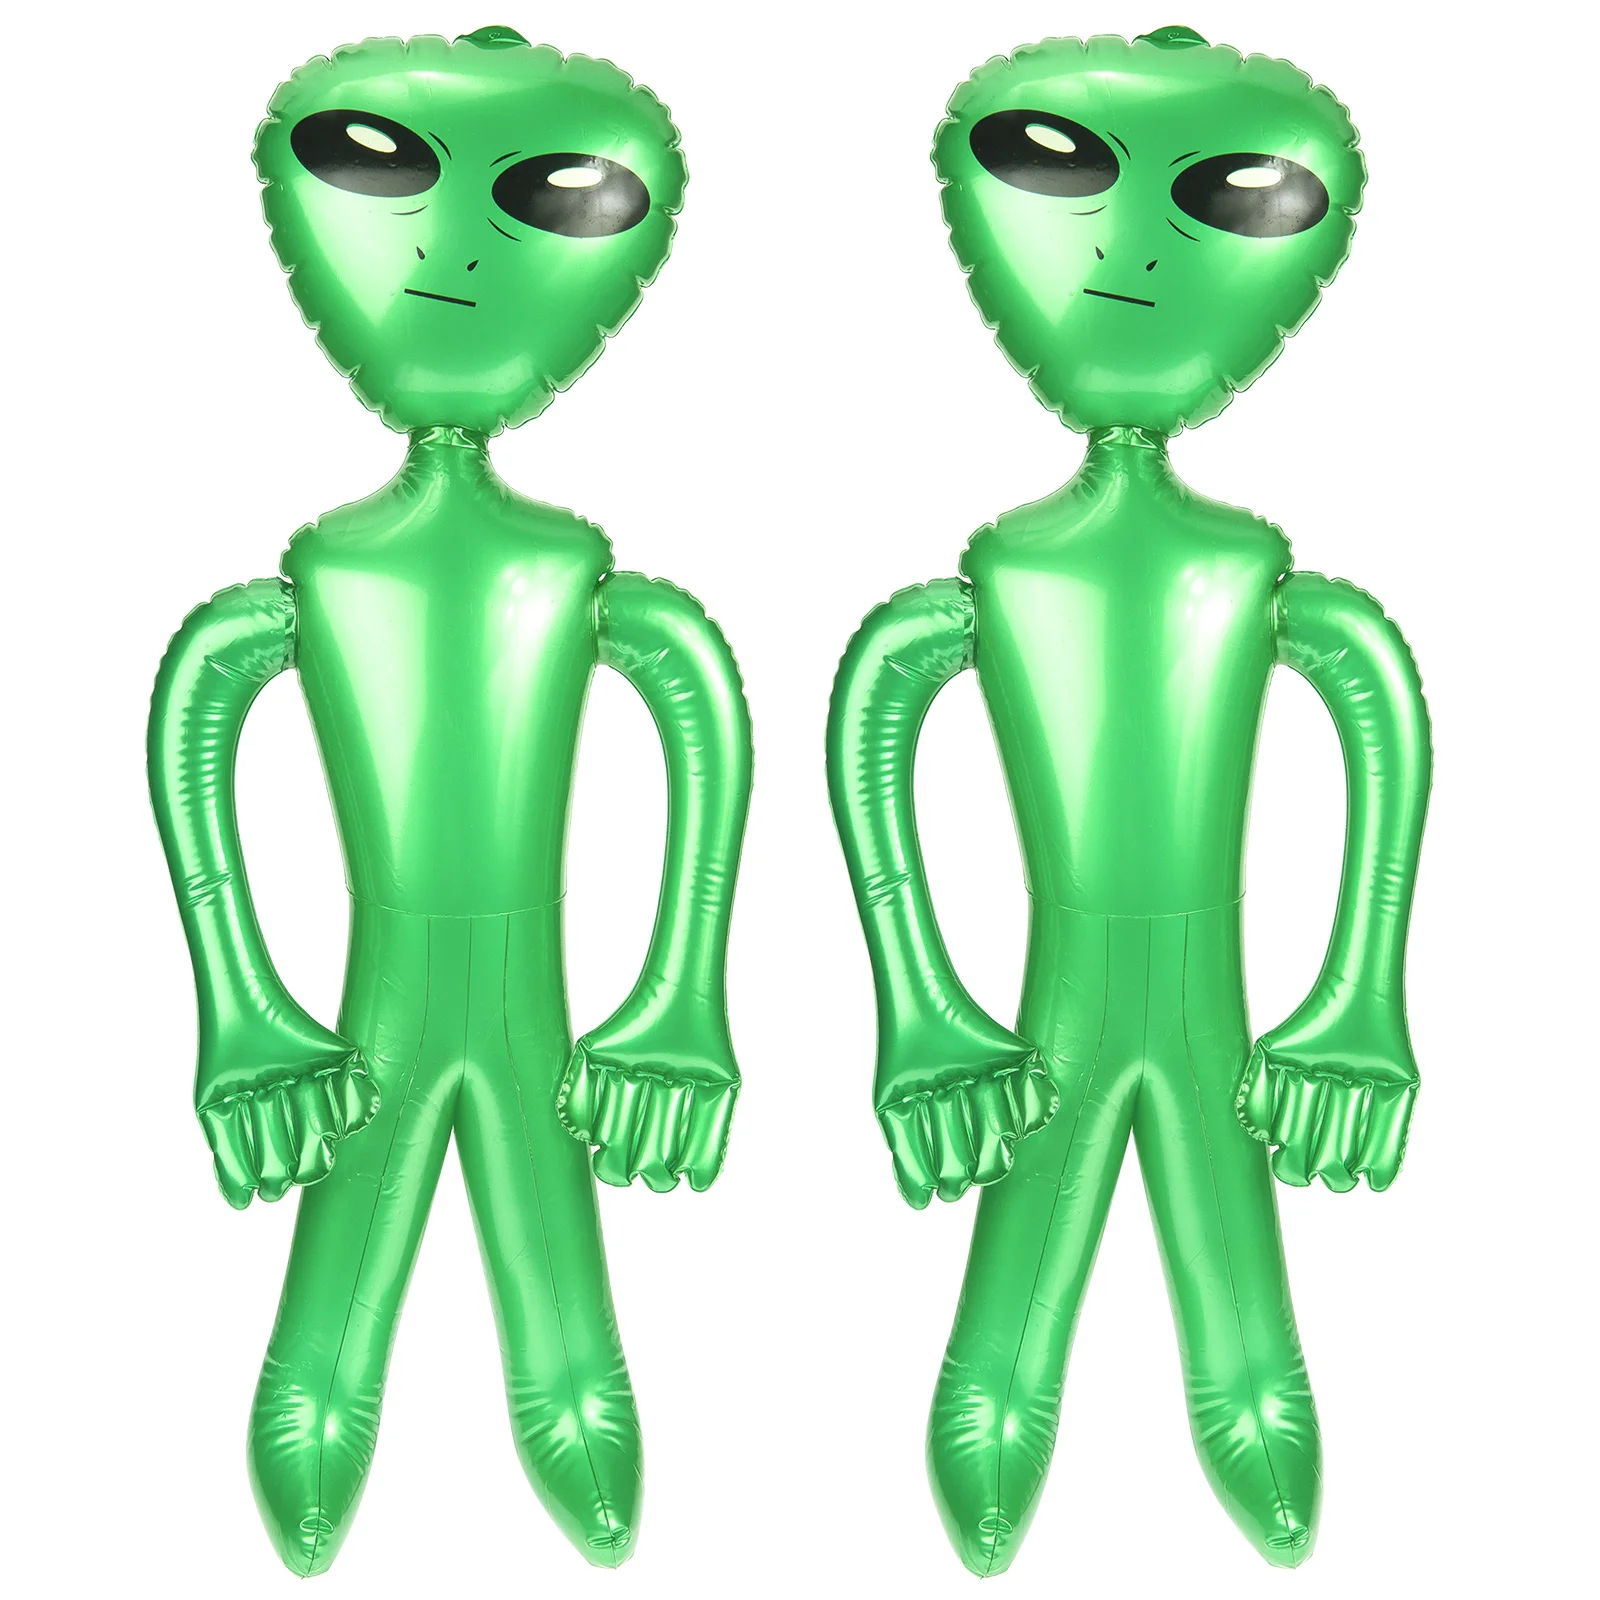 

2 Pcs Inflatable Alien PVC Toys Balloon Halloween Summer Kids Decorations Party Favors Alien-Shaped Balloons Man Inflatables